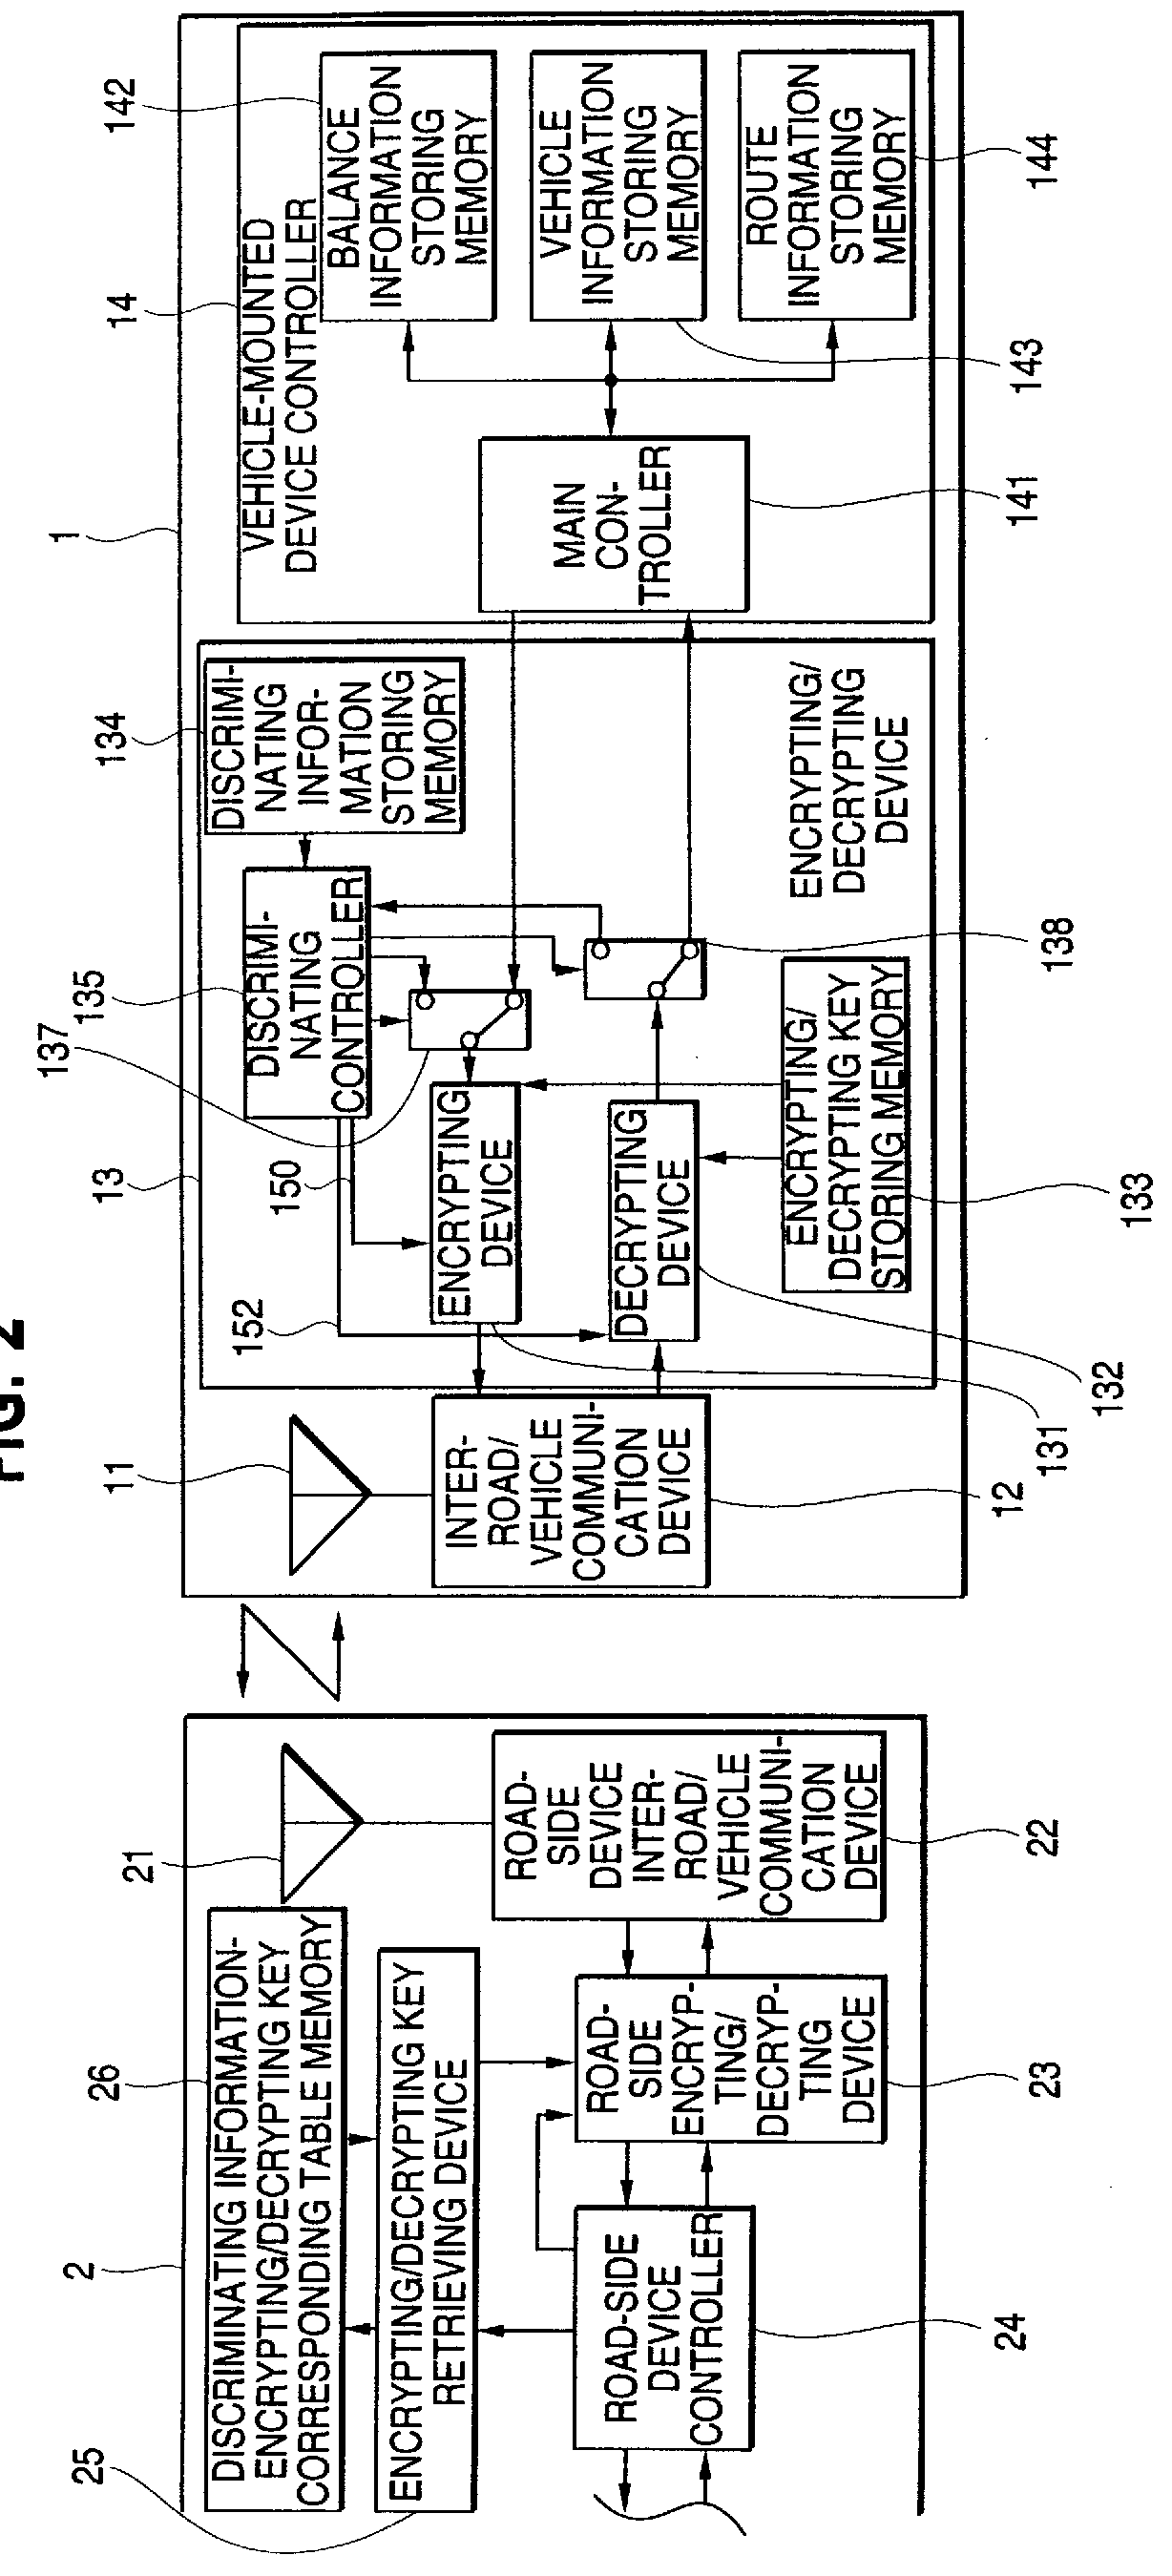 Vehicle-mounted device for automatic charge receipt system